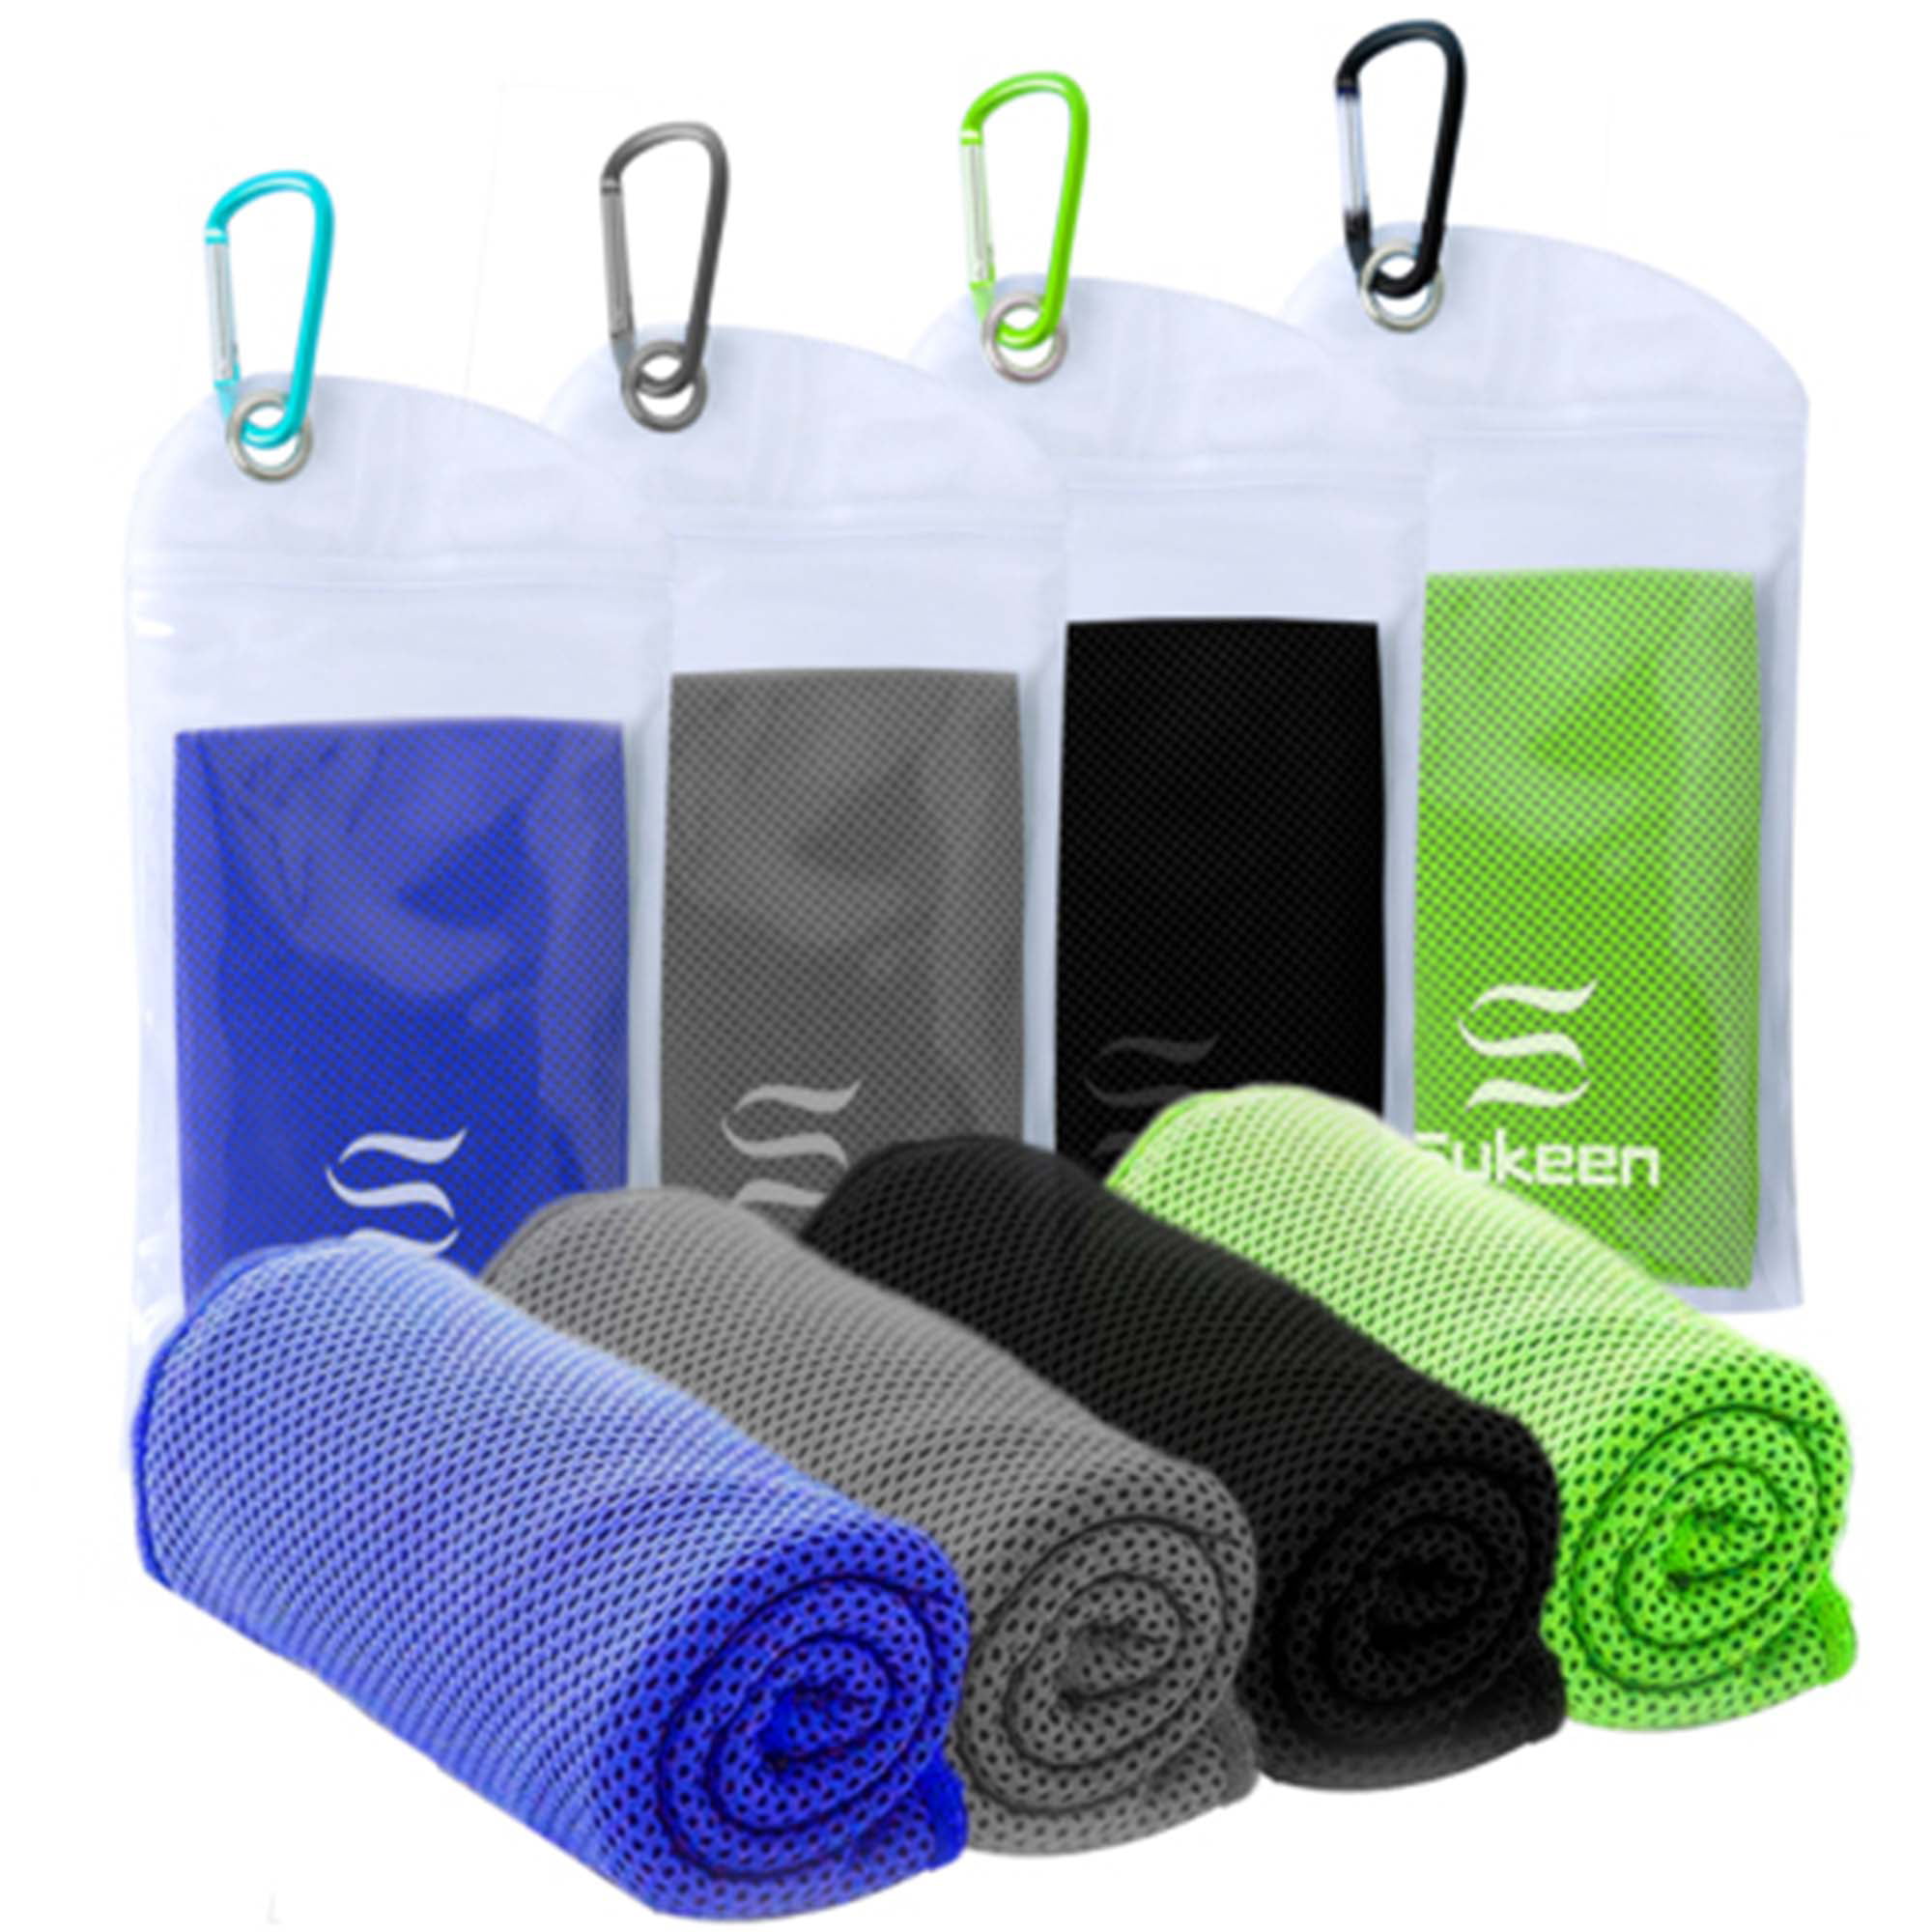 Sukeen Cooling Towel (40x12) Ice Towel, 4 Packs Cooling Towels for Neck  Face, Soft Breathable Chilly Towel, Microfiber Towel for Yoga, Sport,  Running, Gym, Workout,Camping, Fitness & More Activities 